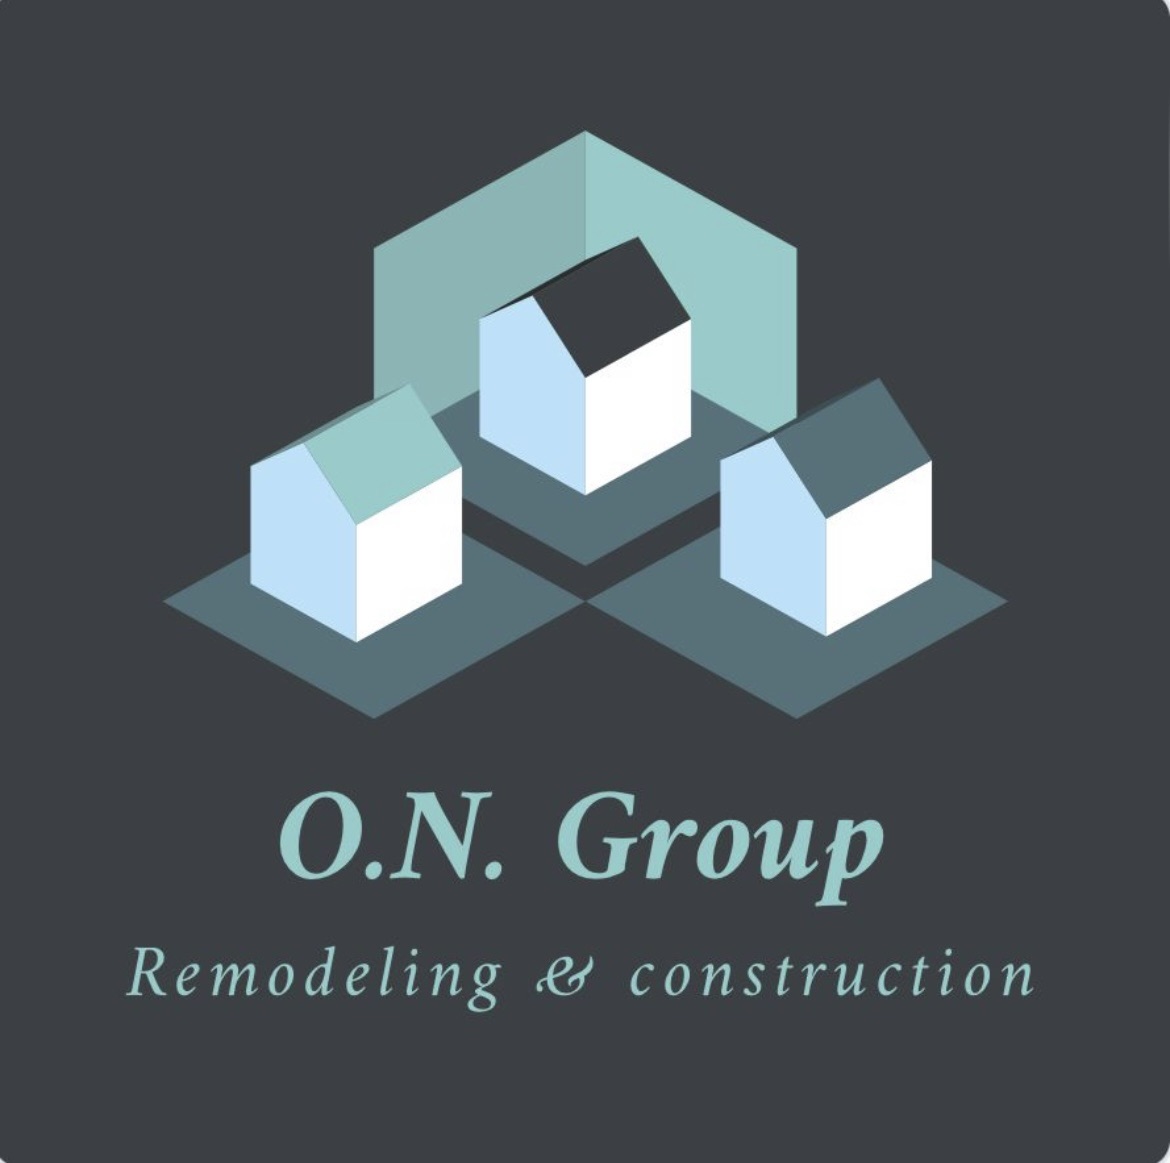 ON group remodeling & construction